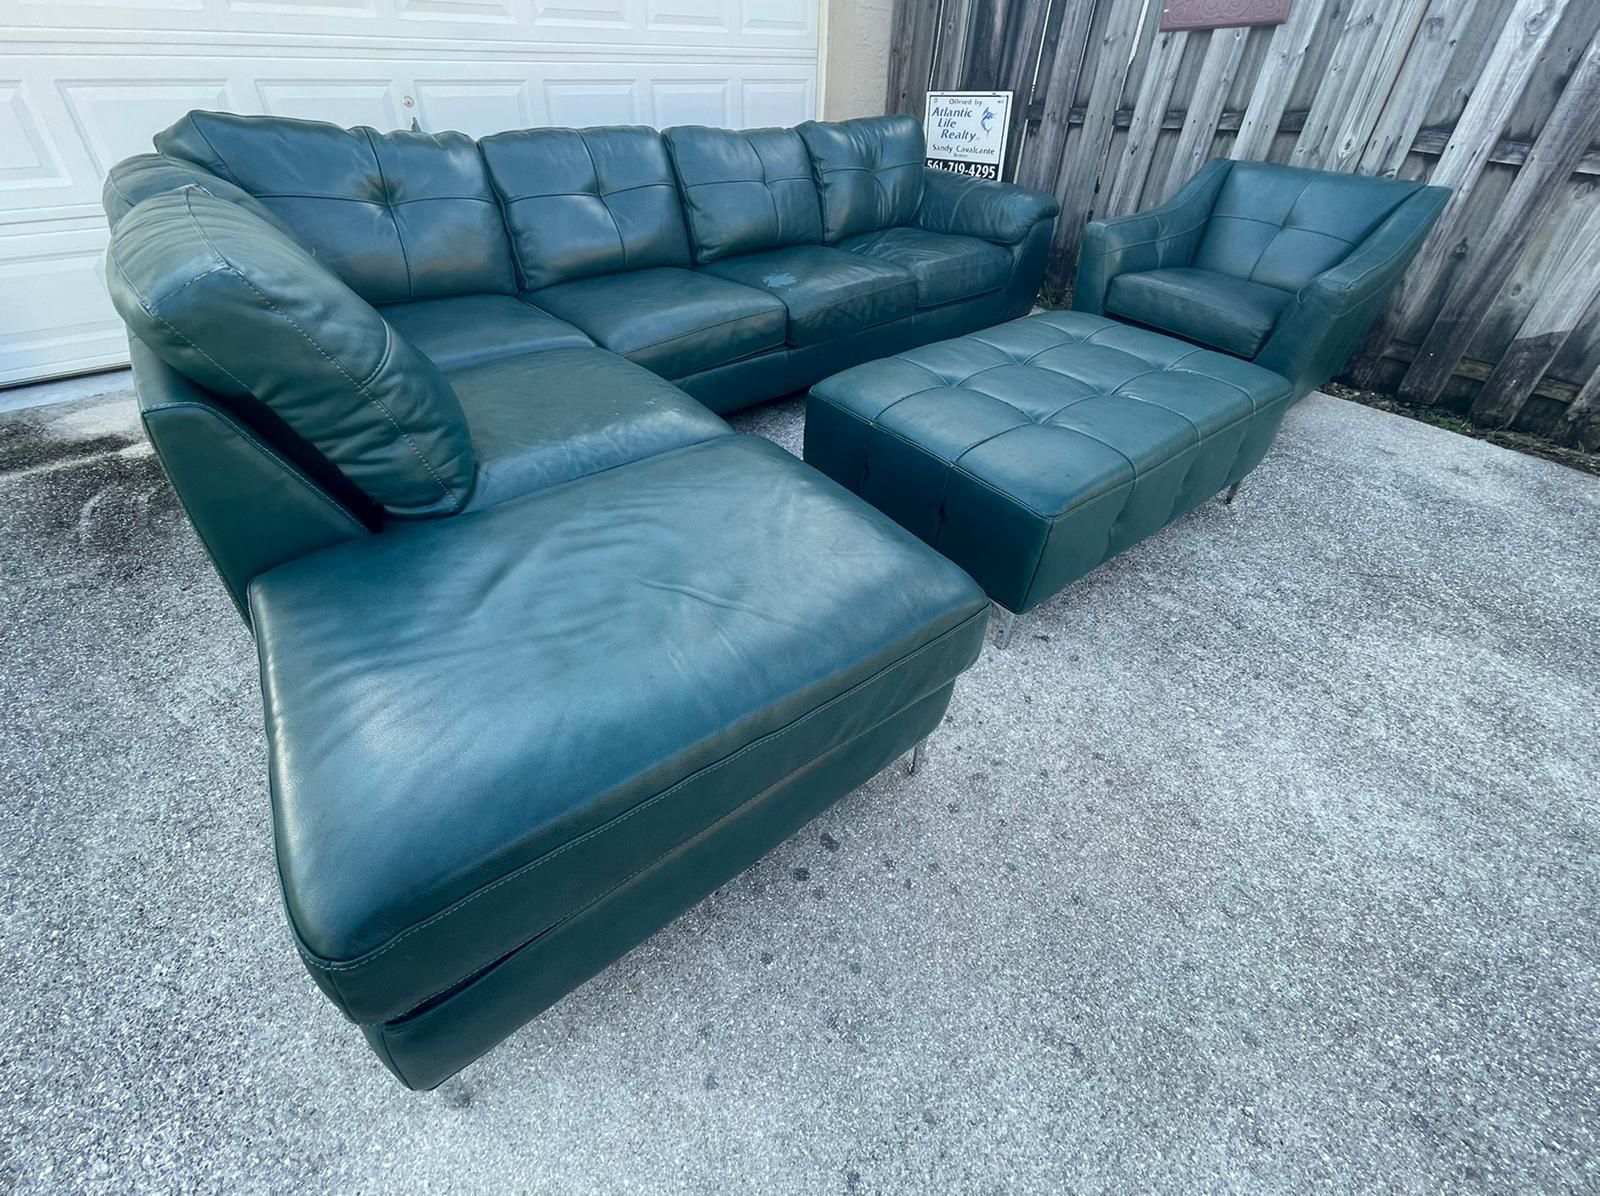 SECTIONAL CINDY CRAWFORD / GREEN / OTTOMAN / CHAIR / DELIVERY NEGOTIABLE